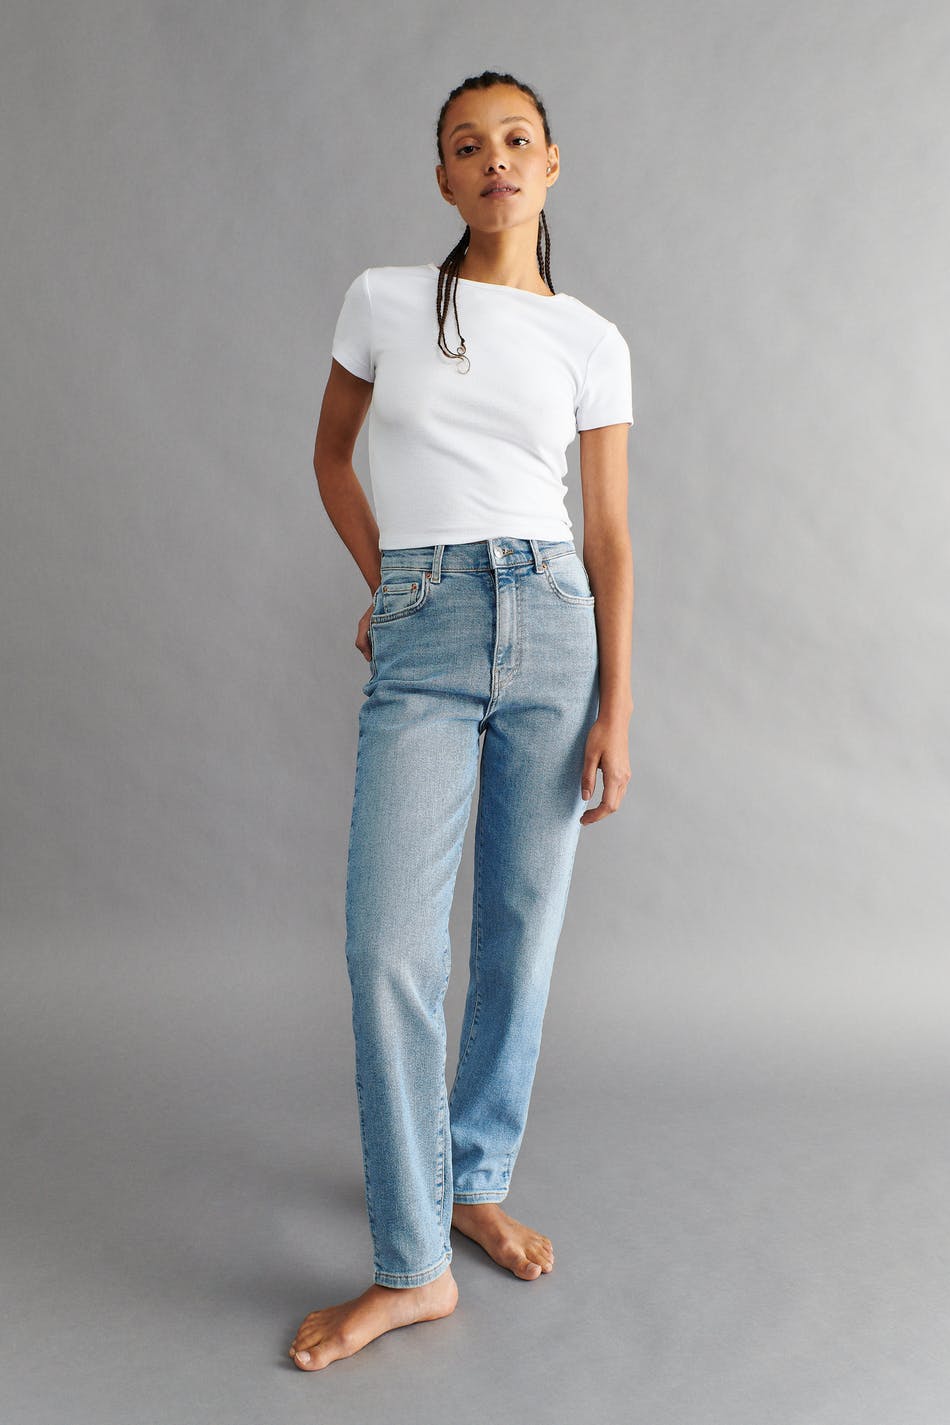 Comfy jeans - Gina Tricot